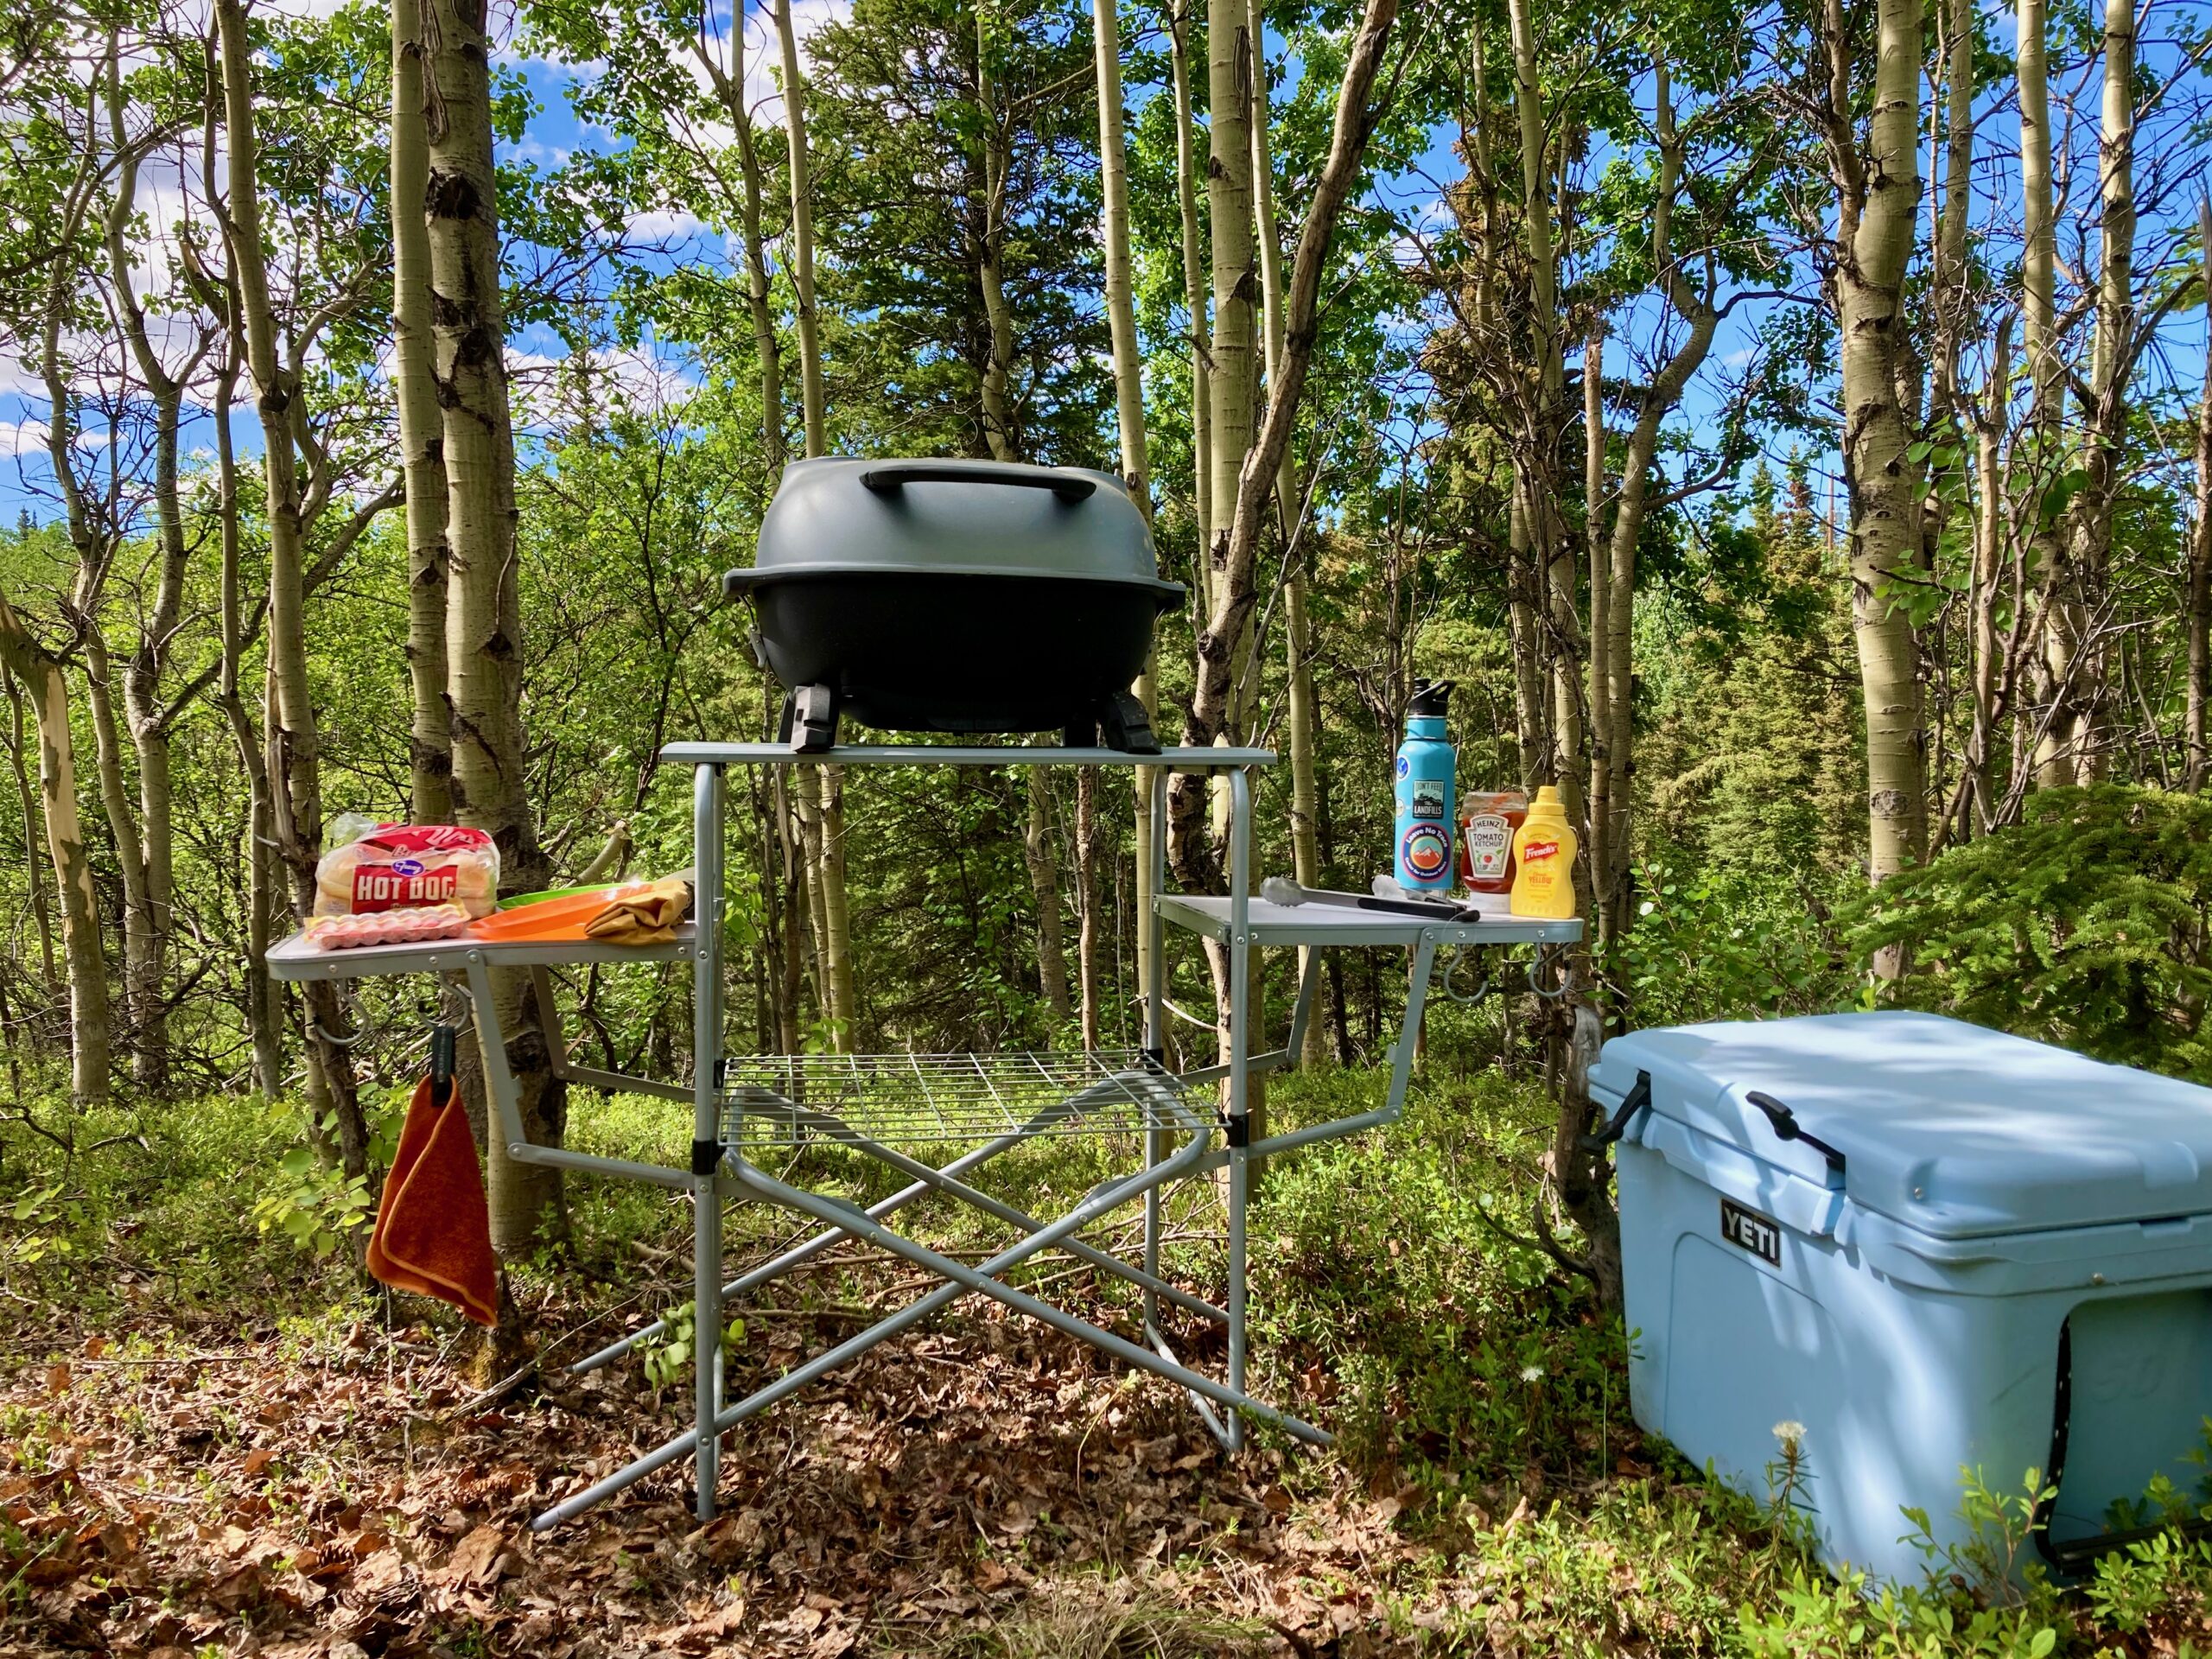 https://www.outdoorlife.com/wp-content/uploads/2022/06/10/Camco-Grill-Table2-scaled.jpeg